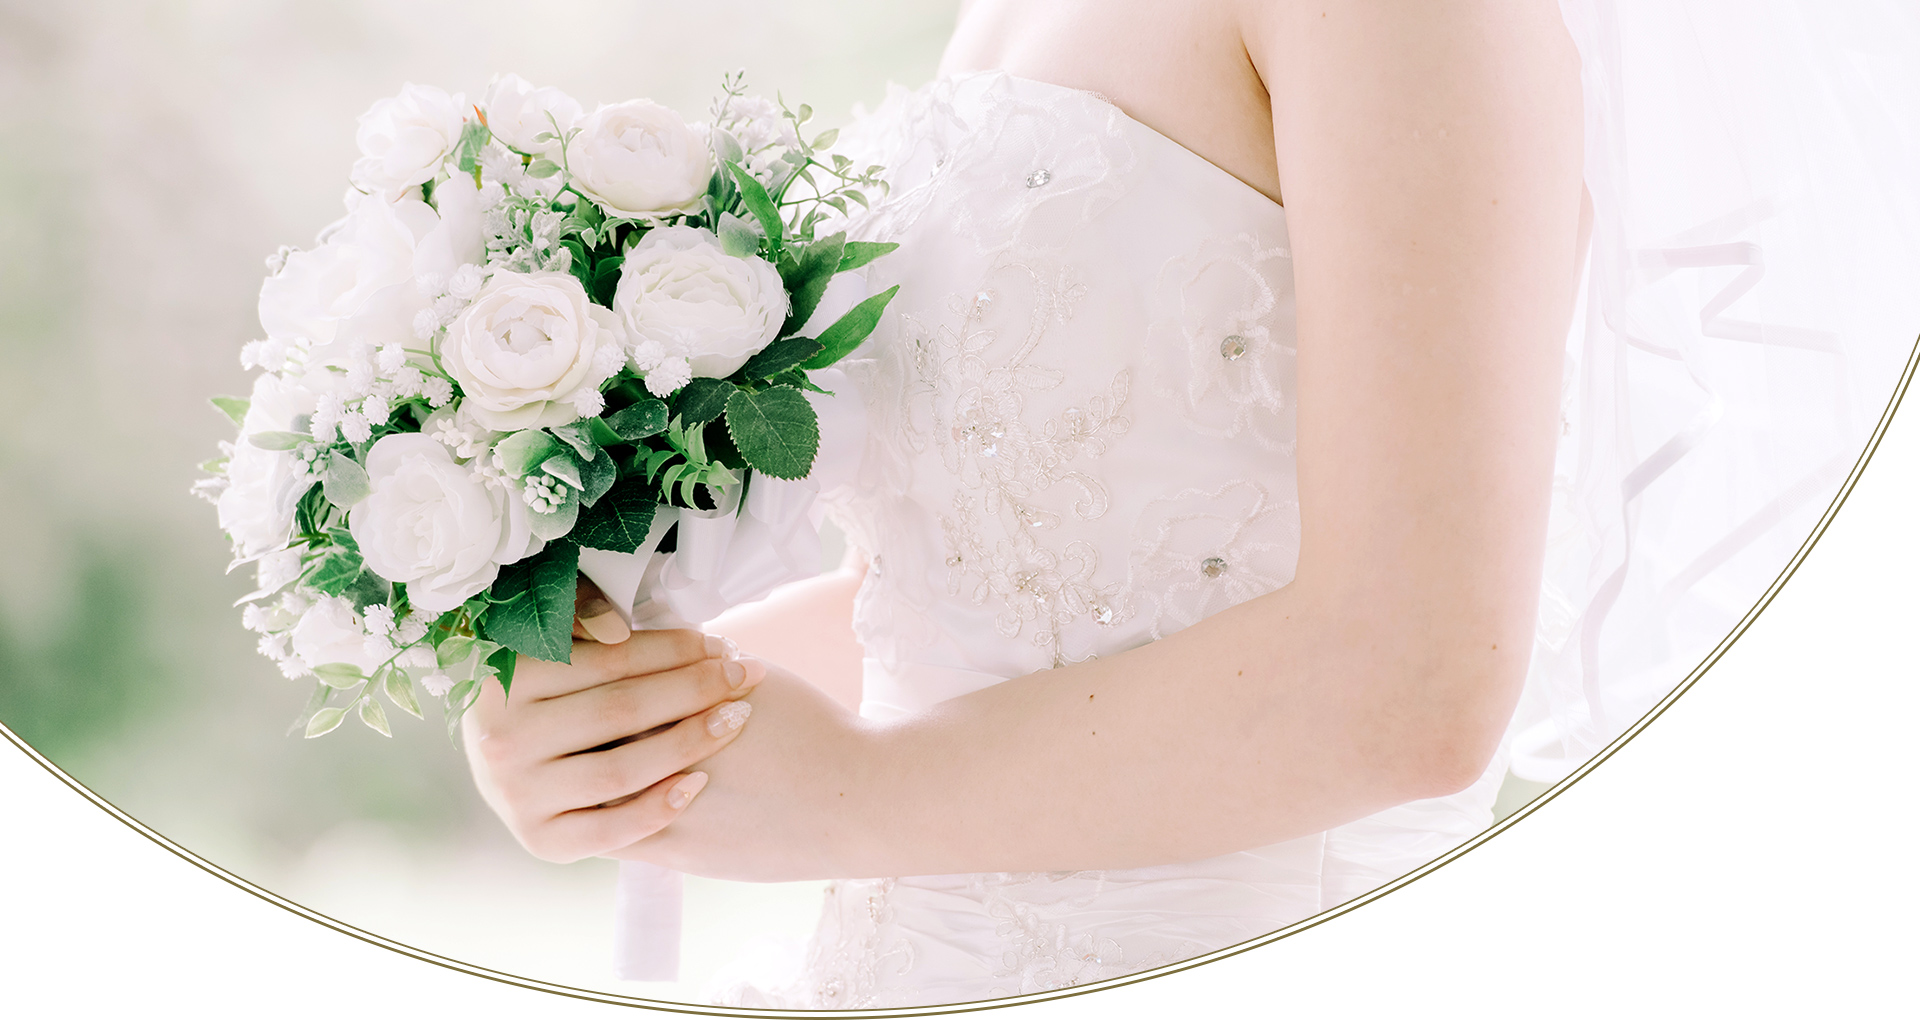 Hold Bridal support company